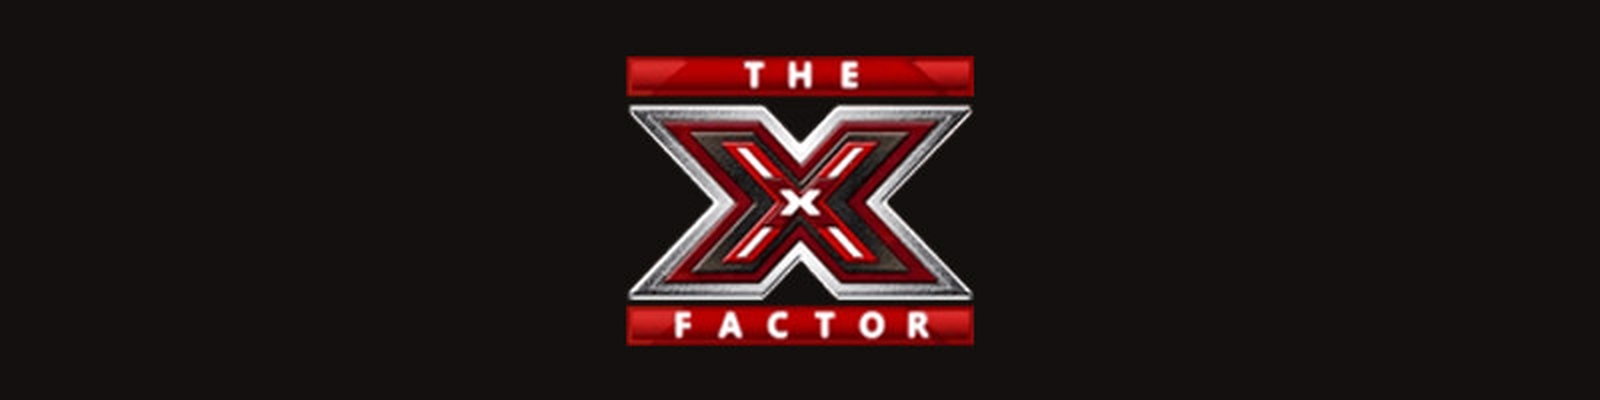 The X Factor demo